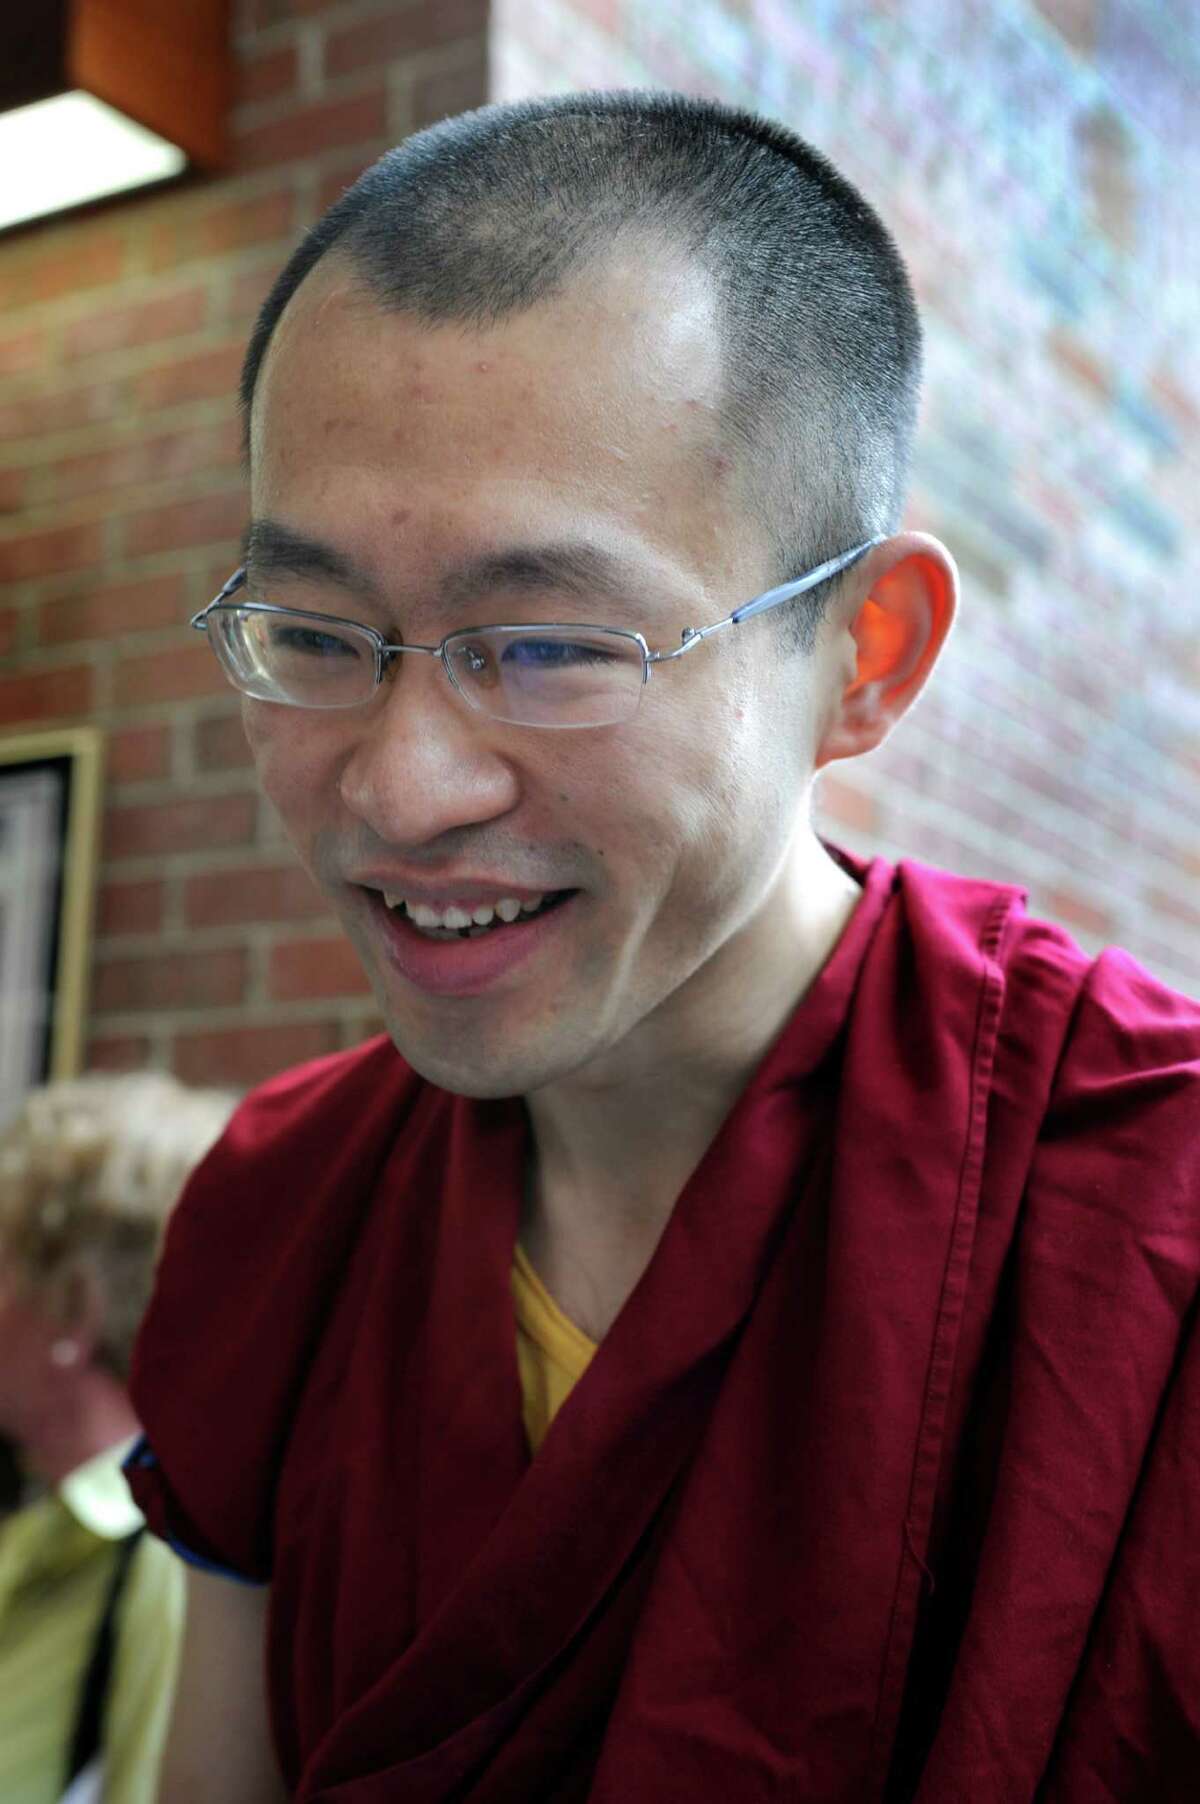 Jampa Gyaltsen, one of five monks at the DNKL Tibetan Buddhist Center for Universal Peace in Redding, is present Wednesday morning for the One Book, One Community kickoff event at City Hall in Danbury, May 16, 2012.